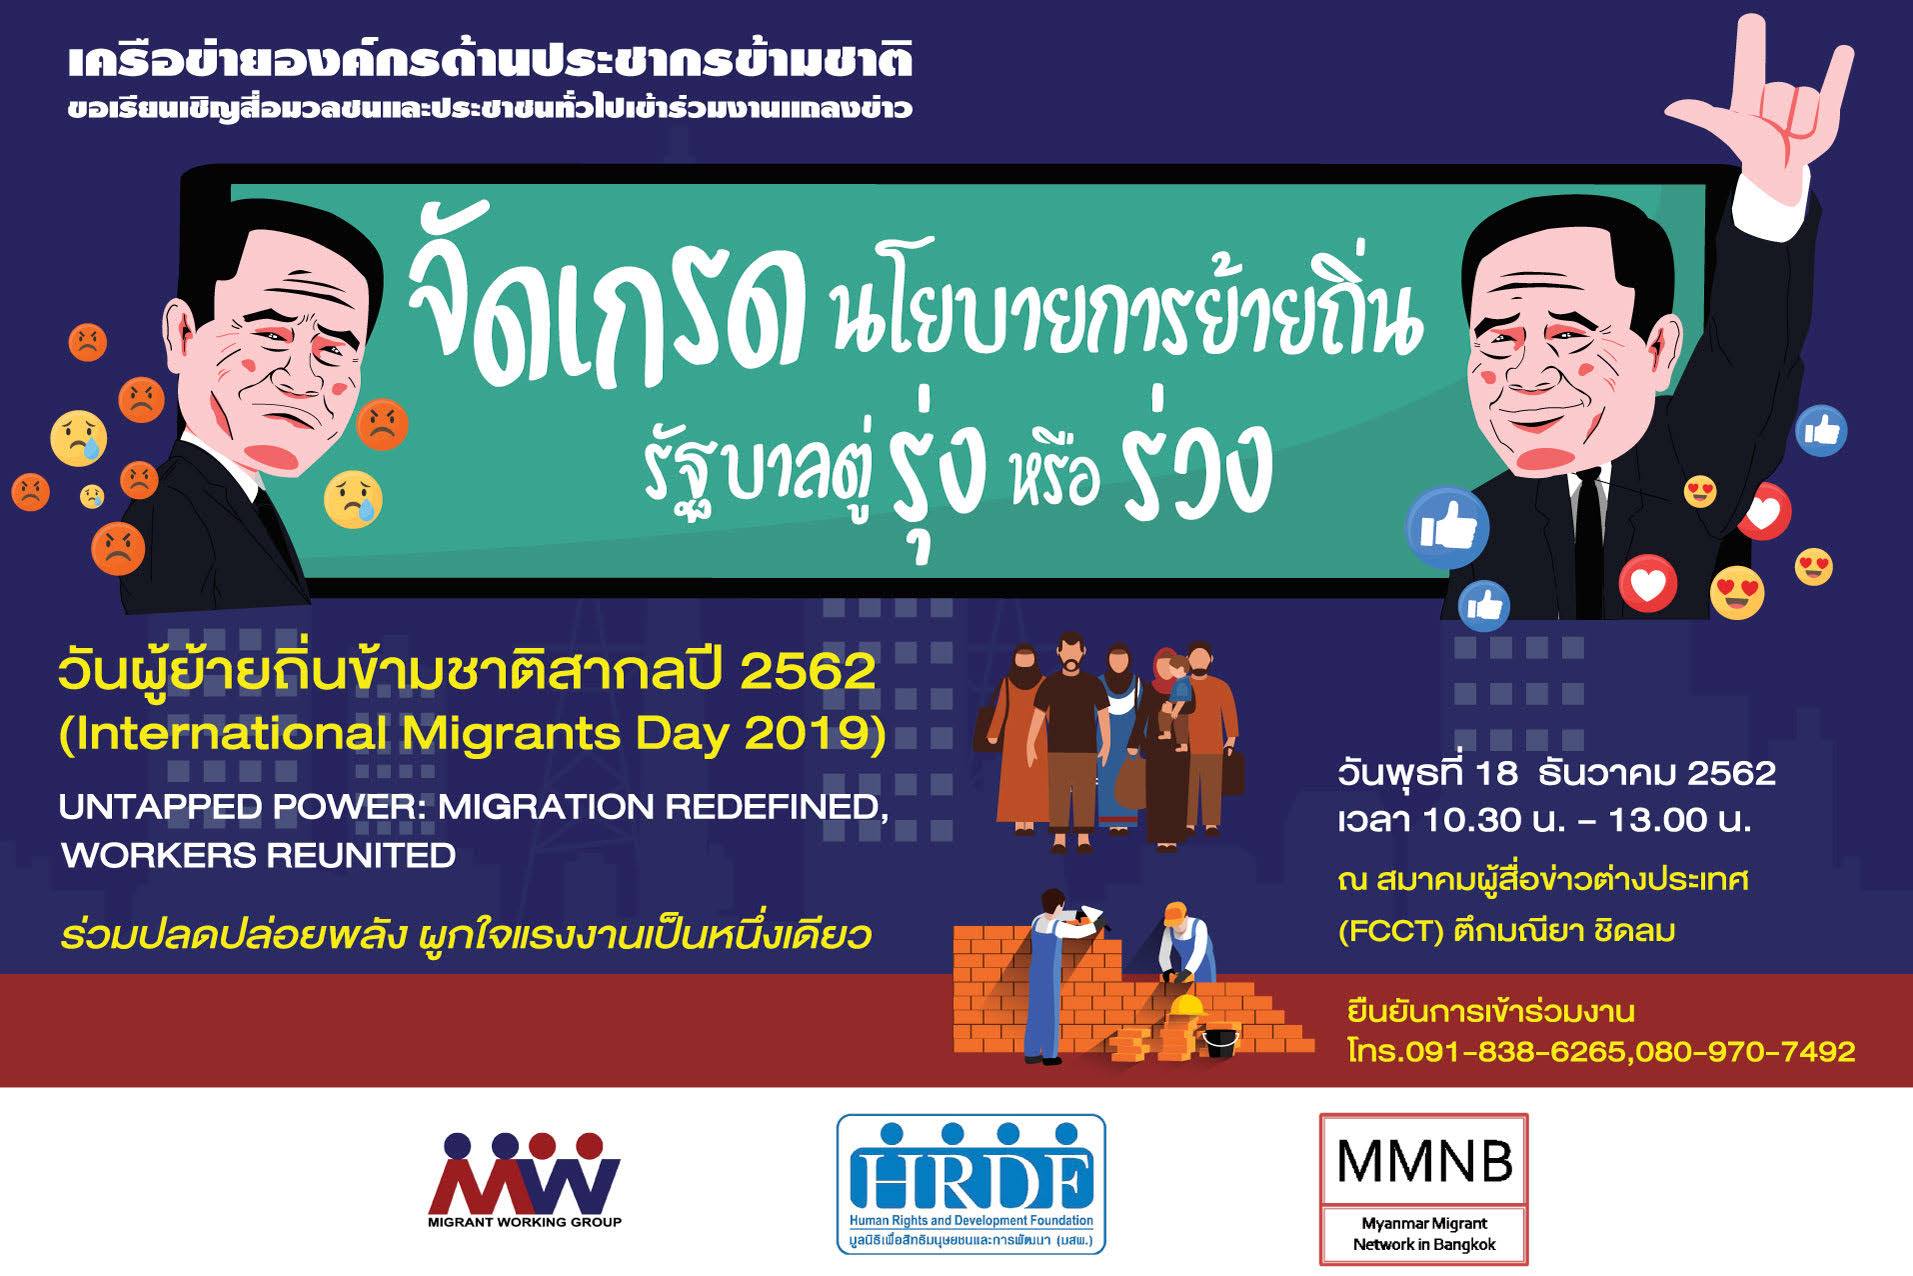 Rating Migration Policy Implementations under Gen. Prayut’s Leadership: Boon or Bane?